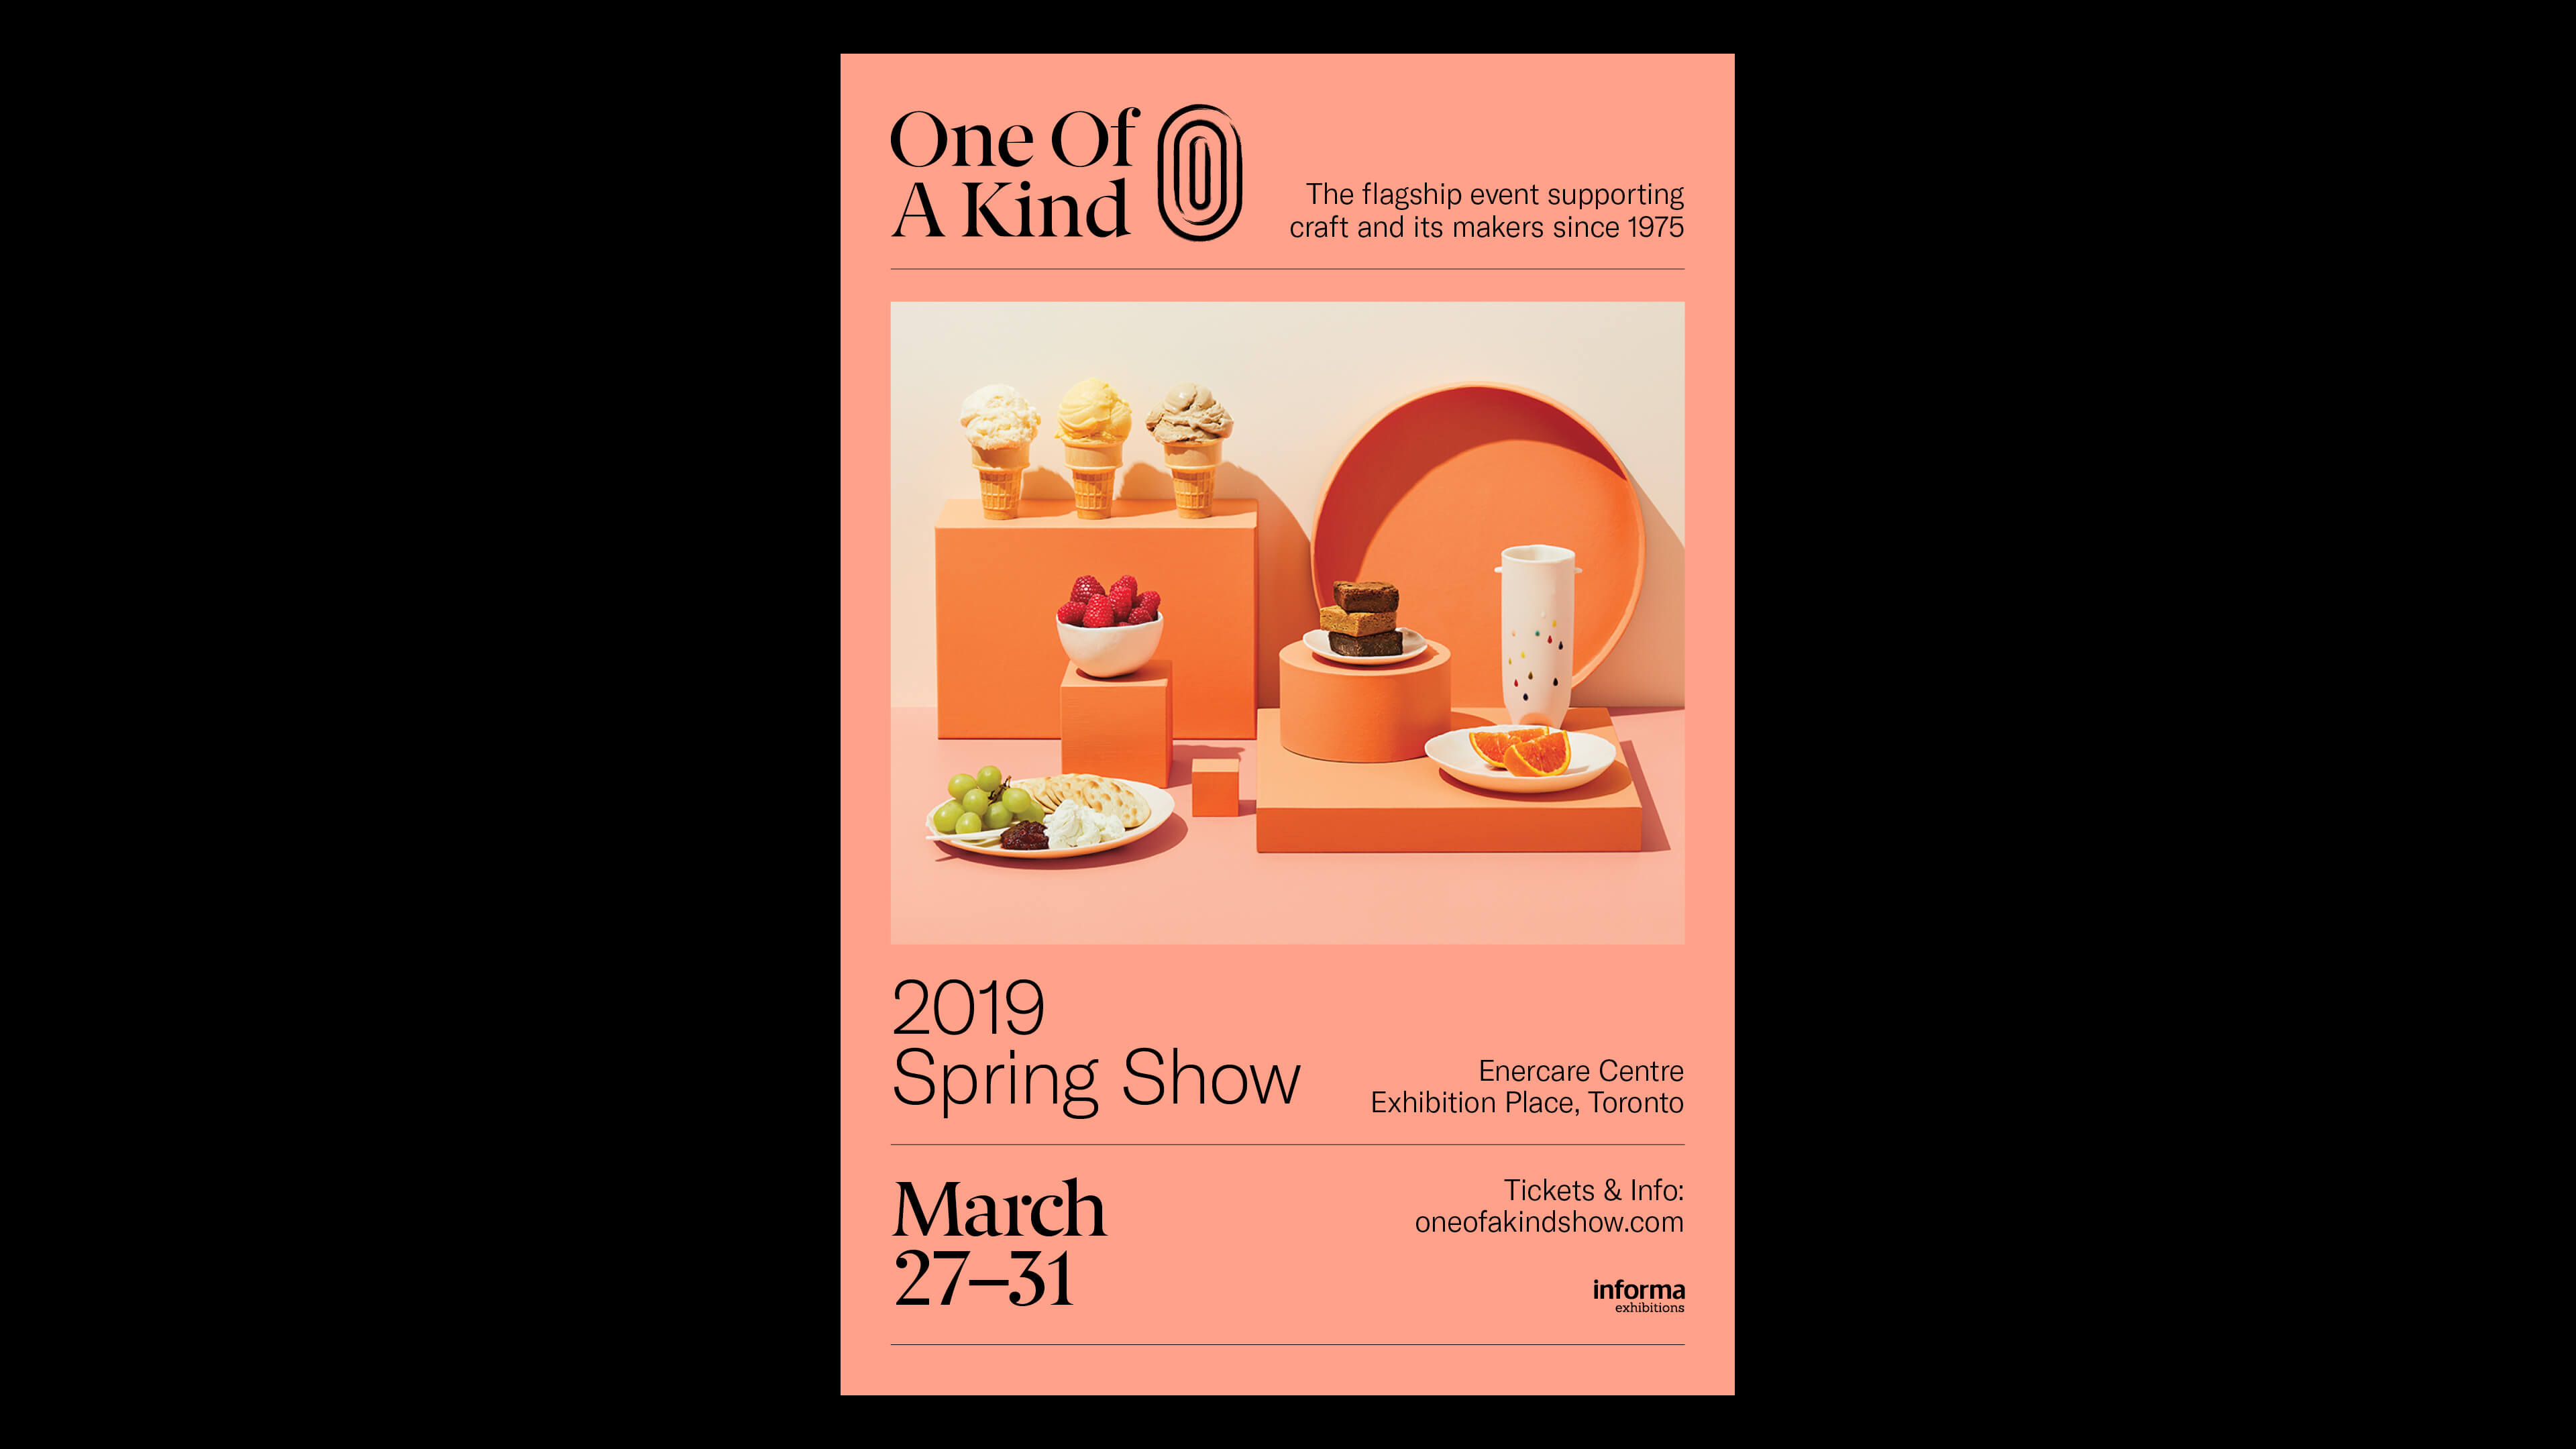 One of a Kind: Celebrating Craft and Community